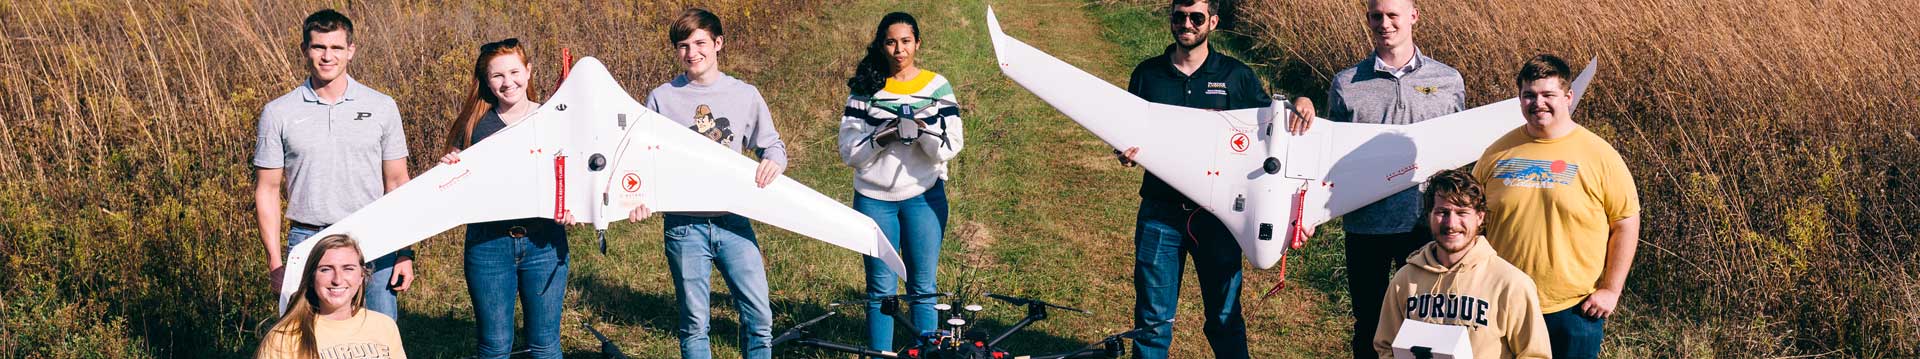 Unmanned Aerial Systems degree at the Purdue Polytechnic Institute